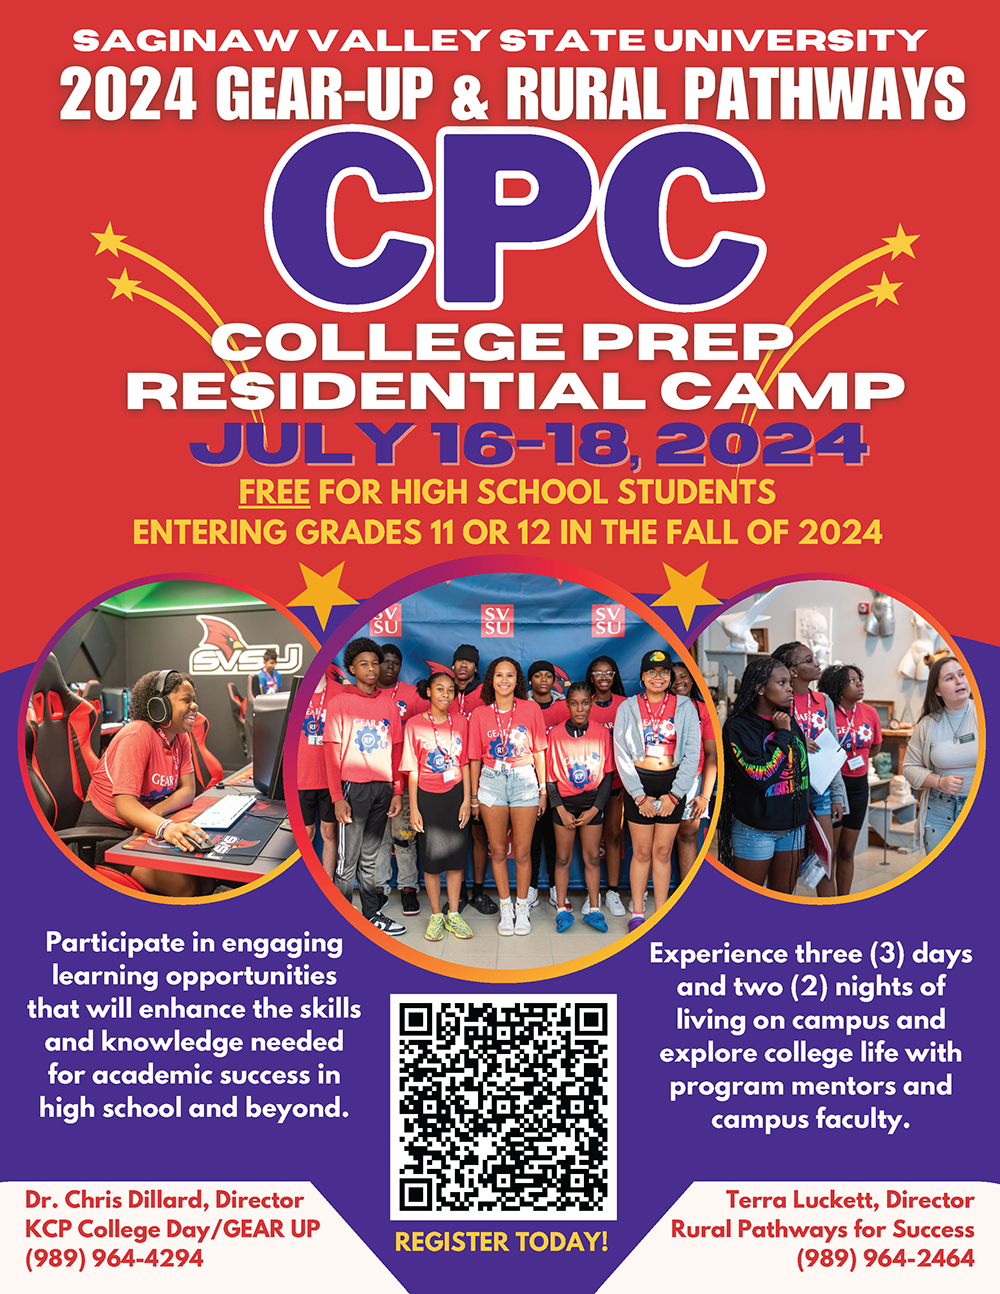 College Prep Residential Camp July 16-18, 2024. Free for high school students entering grades 11 or 12 in the fall of 2024. Participate in engaging learning opportunities that will enhance the skills and knowledge needed for academic success in high school and beyond. Experience three days and two nights of living on campus and explore college life with program mentors and campus faculty.